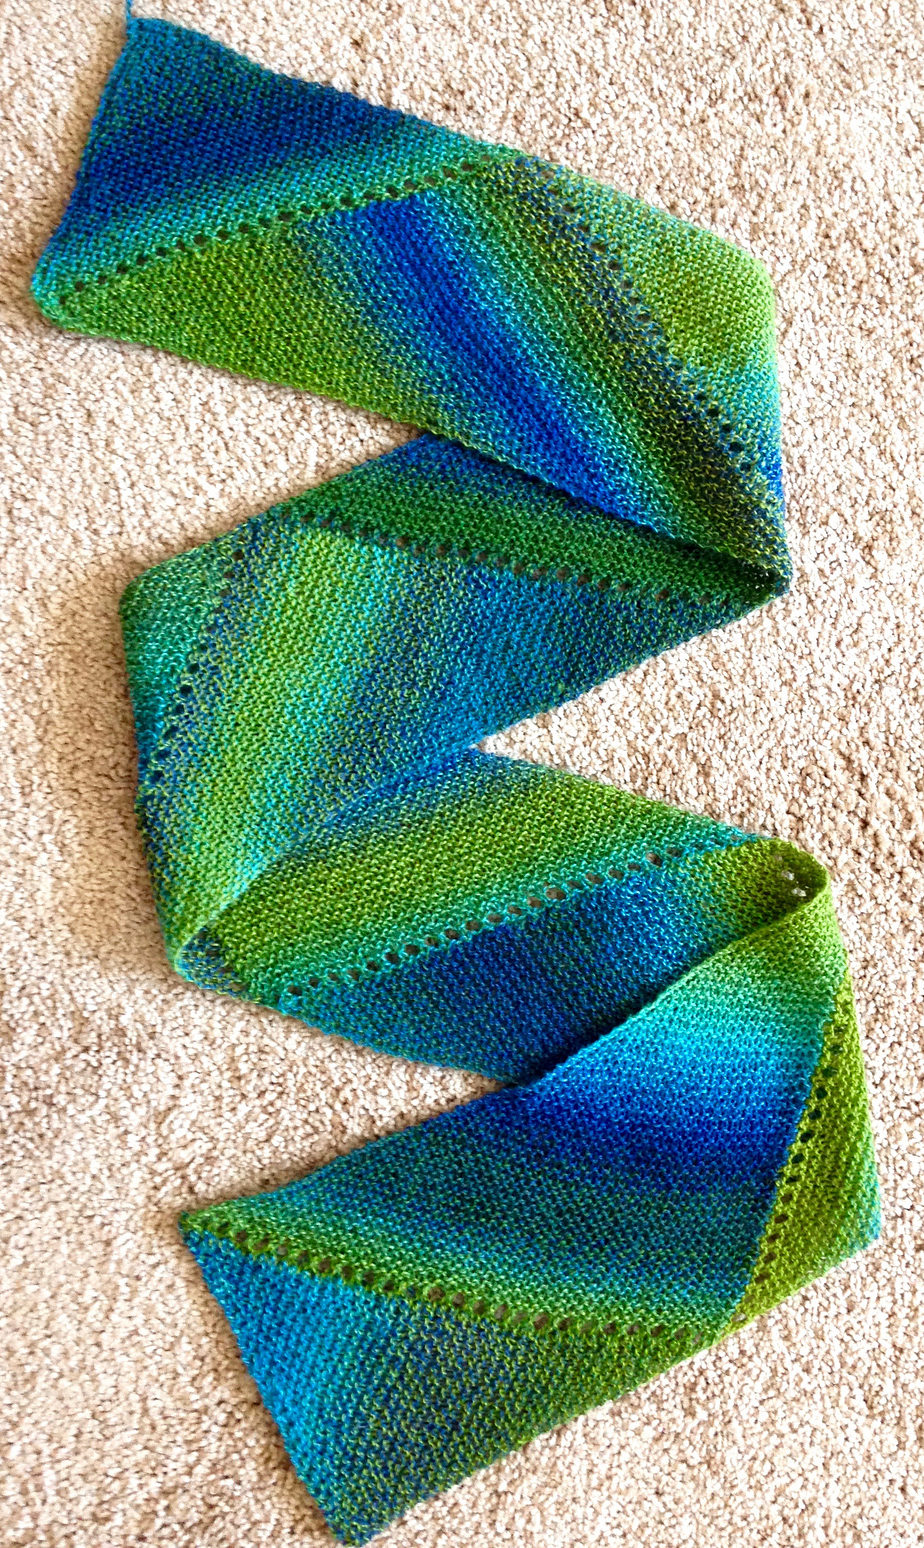 Reversible Scarf Knitting Patterns | In the Loop Knitting